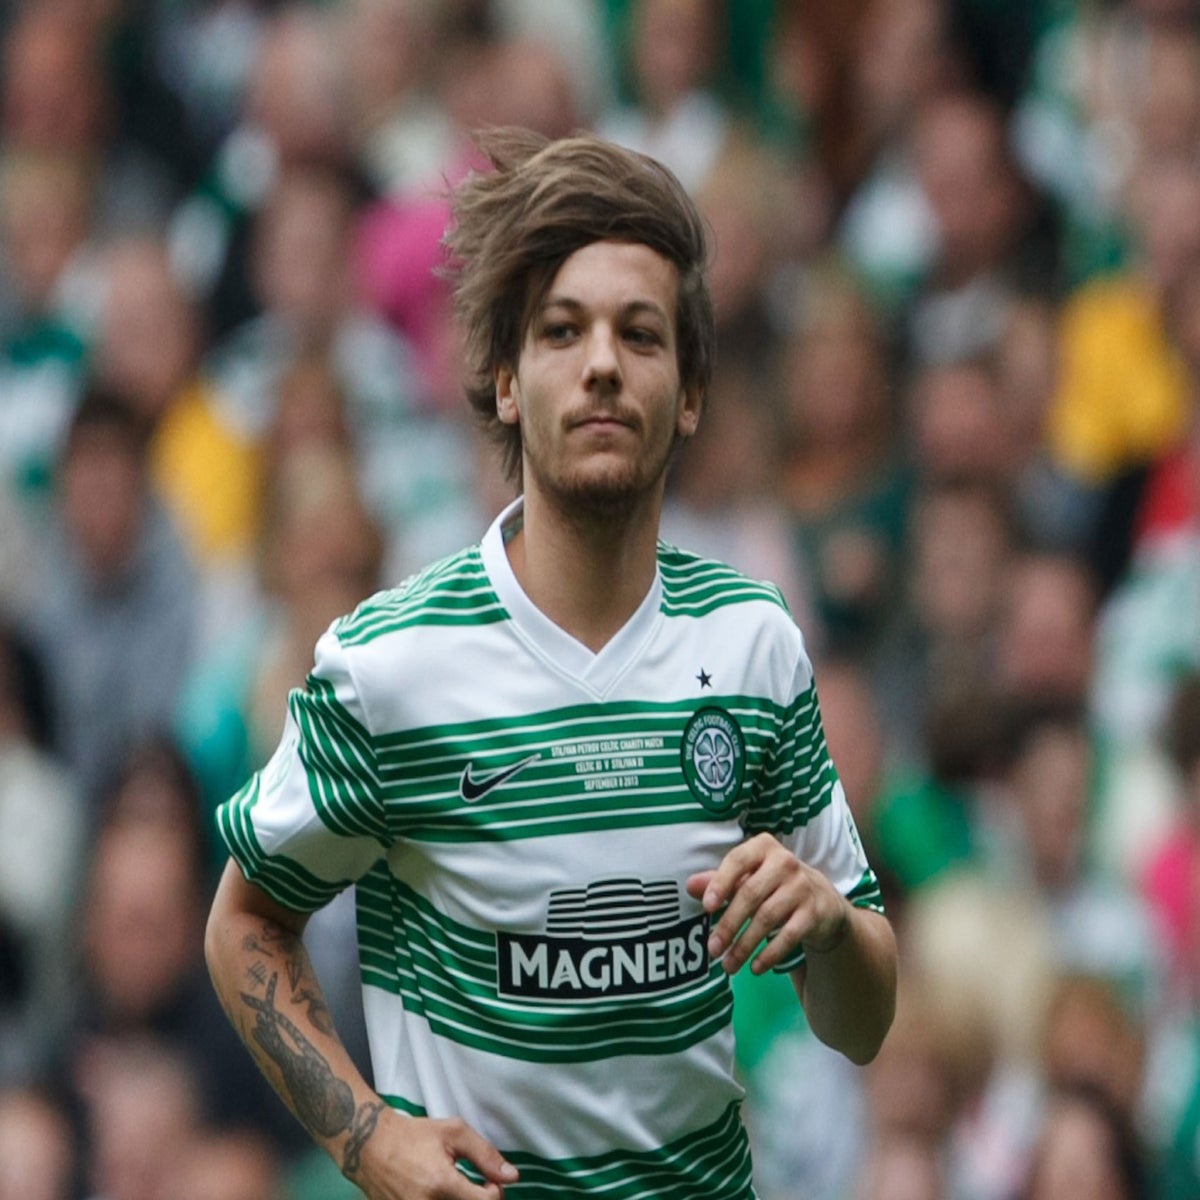 One Direction star Louis Tomlinson to don number 28 shirt in Doncaster  Rovers debut, The Independent